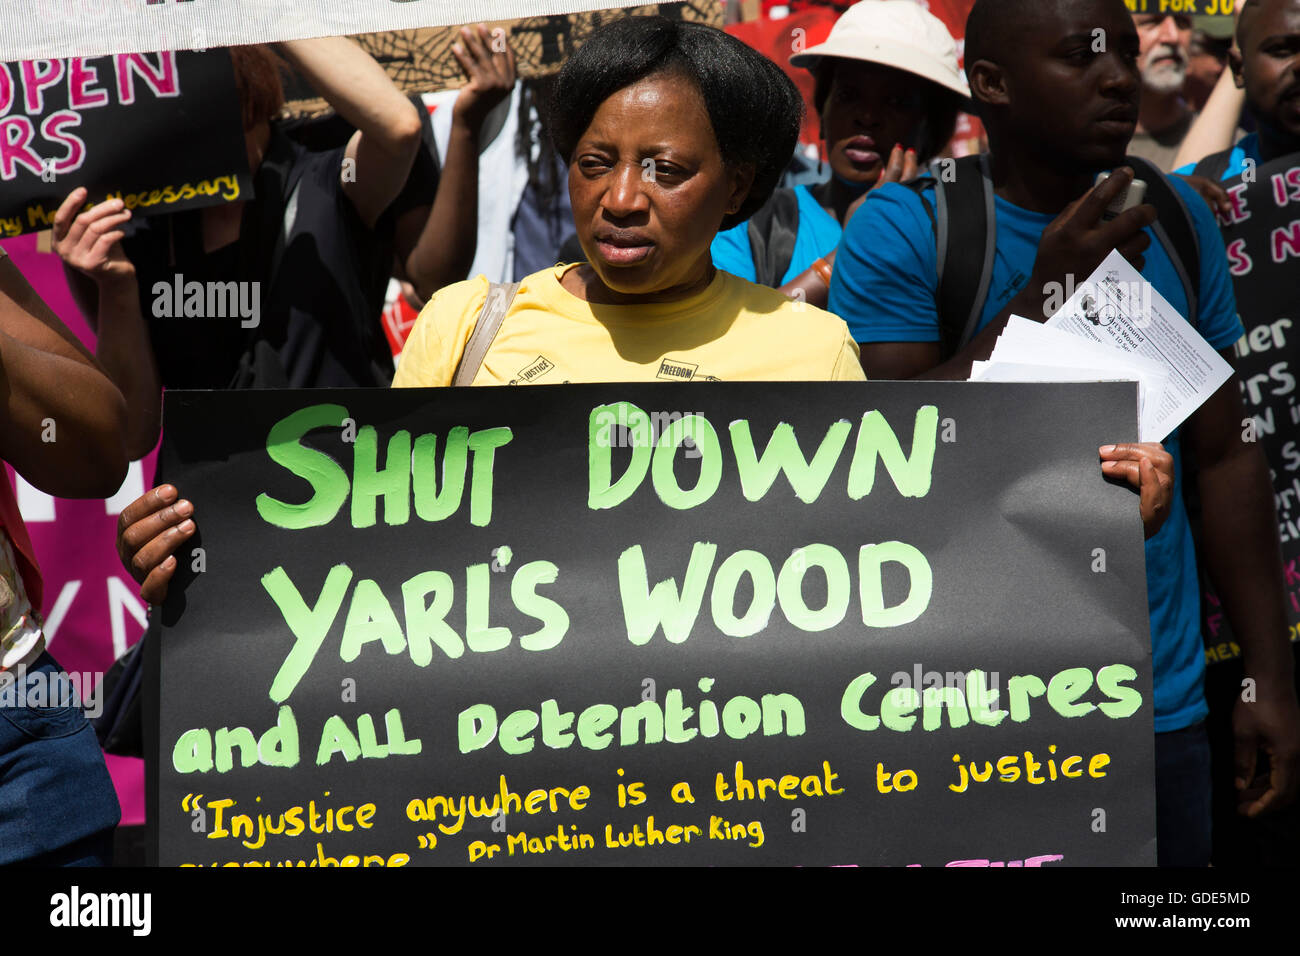 London, UK. 16th July, 2016. Black Lives Matter supporters calling for a shut down of detention centres at the Peoples Assembly demonstration: No More Austerity - No To Racism - Tories Must Go, on Saturday July 16th in London, United Kingdom. Tens of thousands of people gathered to protest in a march through the capital protesting against the Conservative Party cuts. Almost 150 Councillors from across the country have signed a letter criticising the Government for funding cuts and and will be joining those marching in London. Credit:  Michael Kemp/Alamy Live News Stock Photo